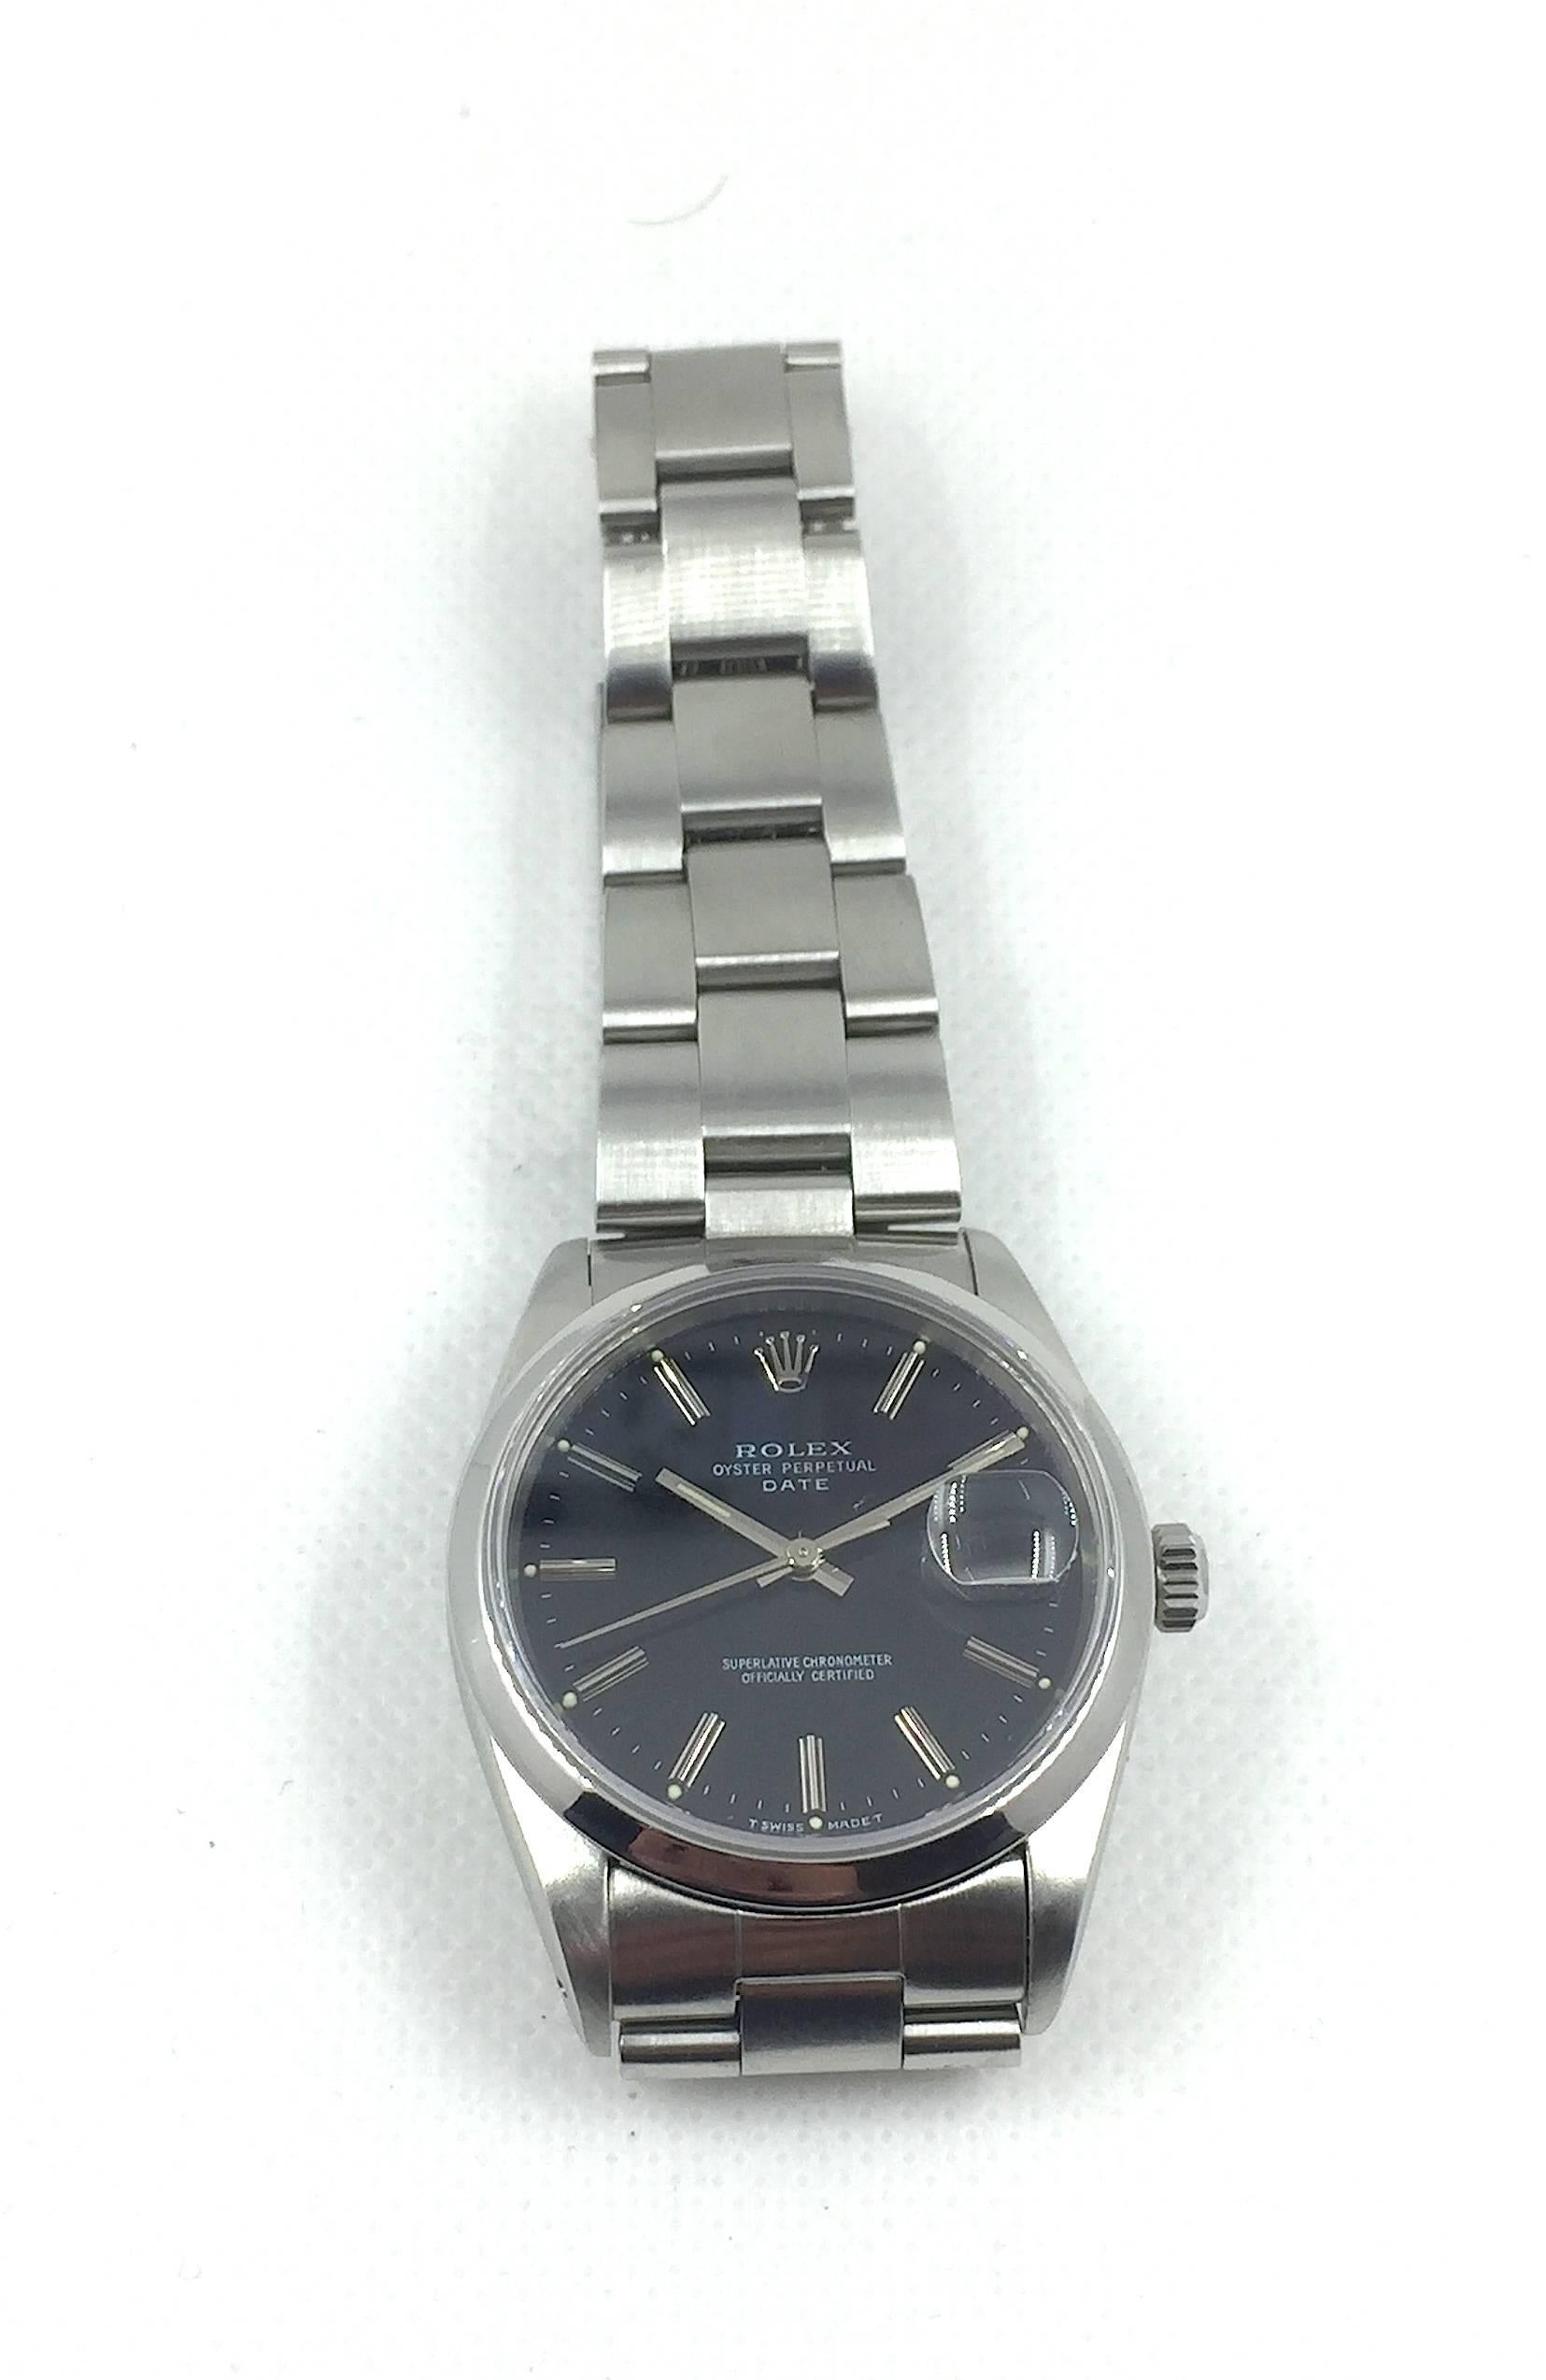 Rolex Stainless Steel Oyster Perpetual Date Wristwatch
Factory Black Dial with Applied Hour Markers and Luminous Hands
Stainless Steel Smooth Bezel
34mm in size 
Rolex Calibre Base 3000 Automatic Movement
Sapphire Crystal
Early 1990's